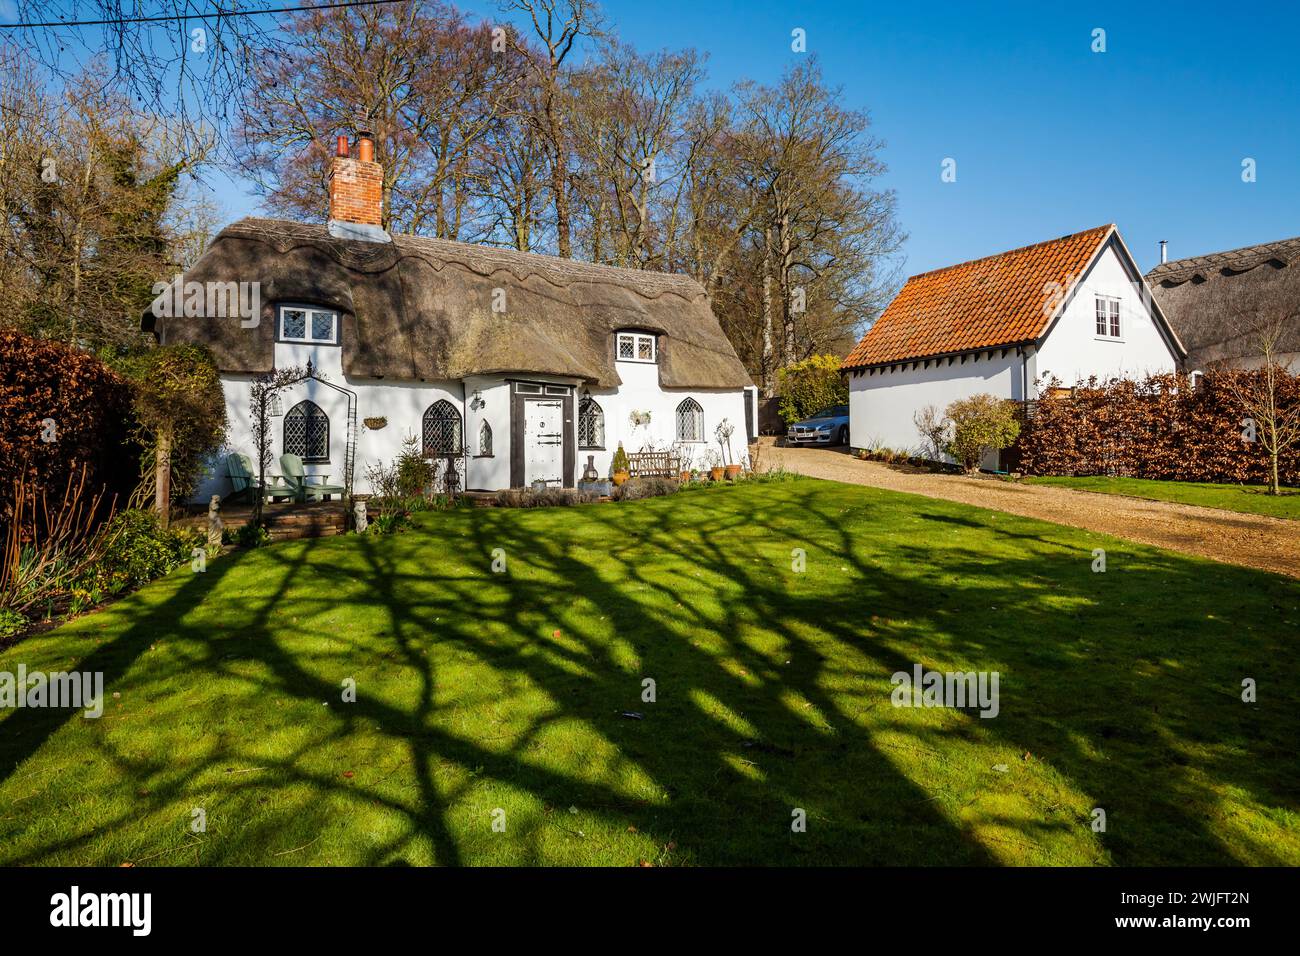 Dalham, Suffolk, England - Feb 19 2016: 16th Century thatched grade II listed cottage in sunlight Stock Photo